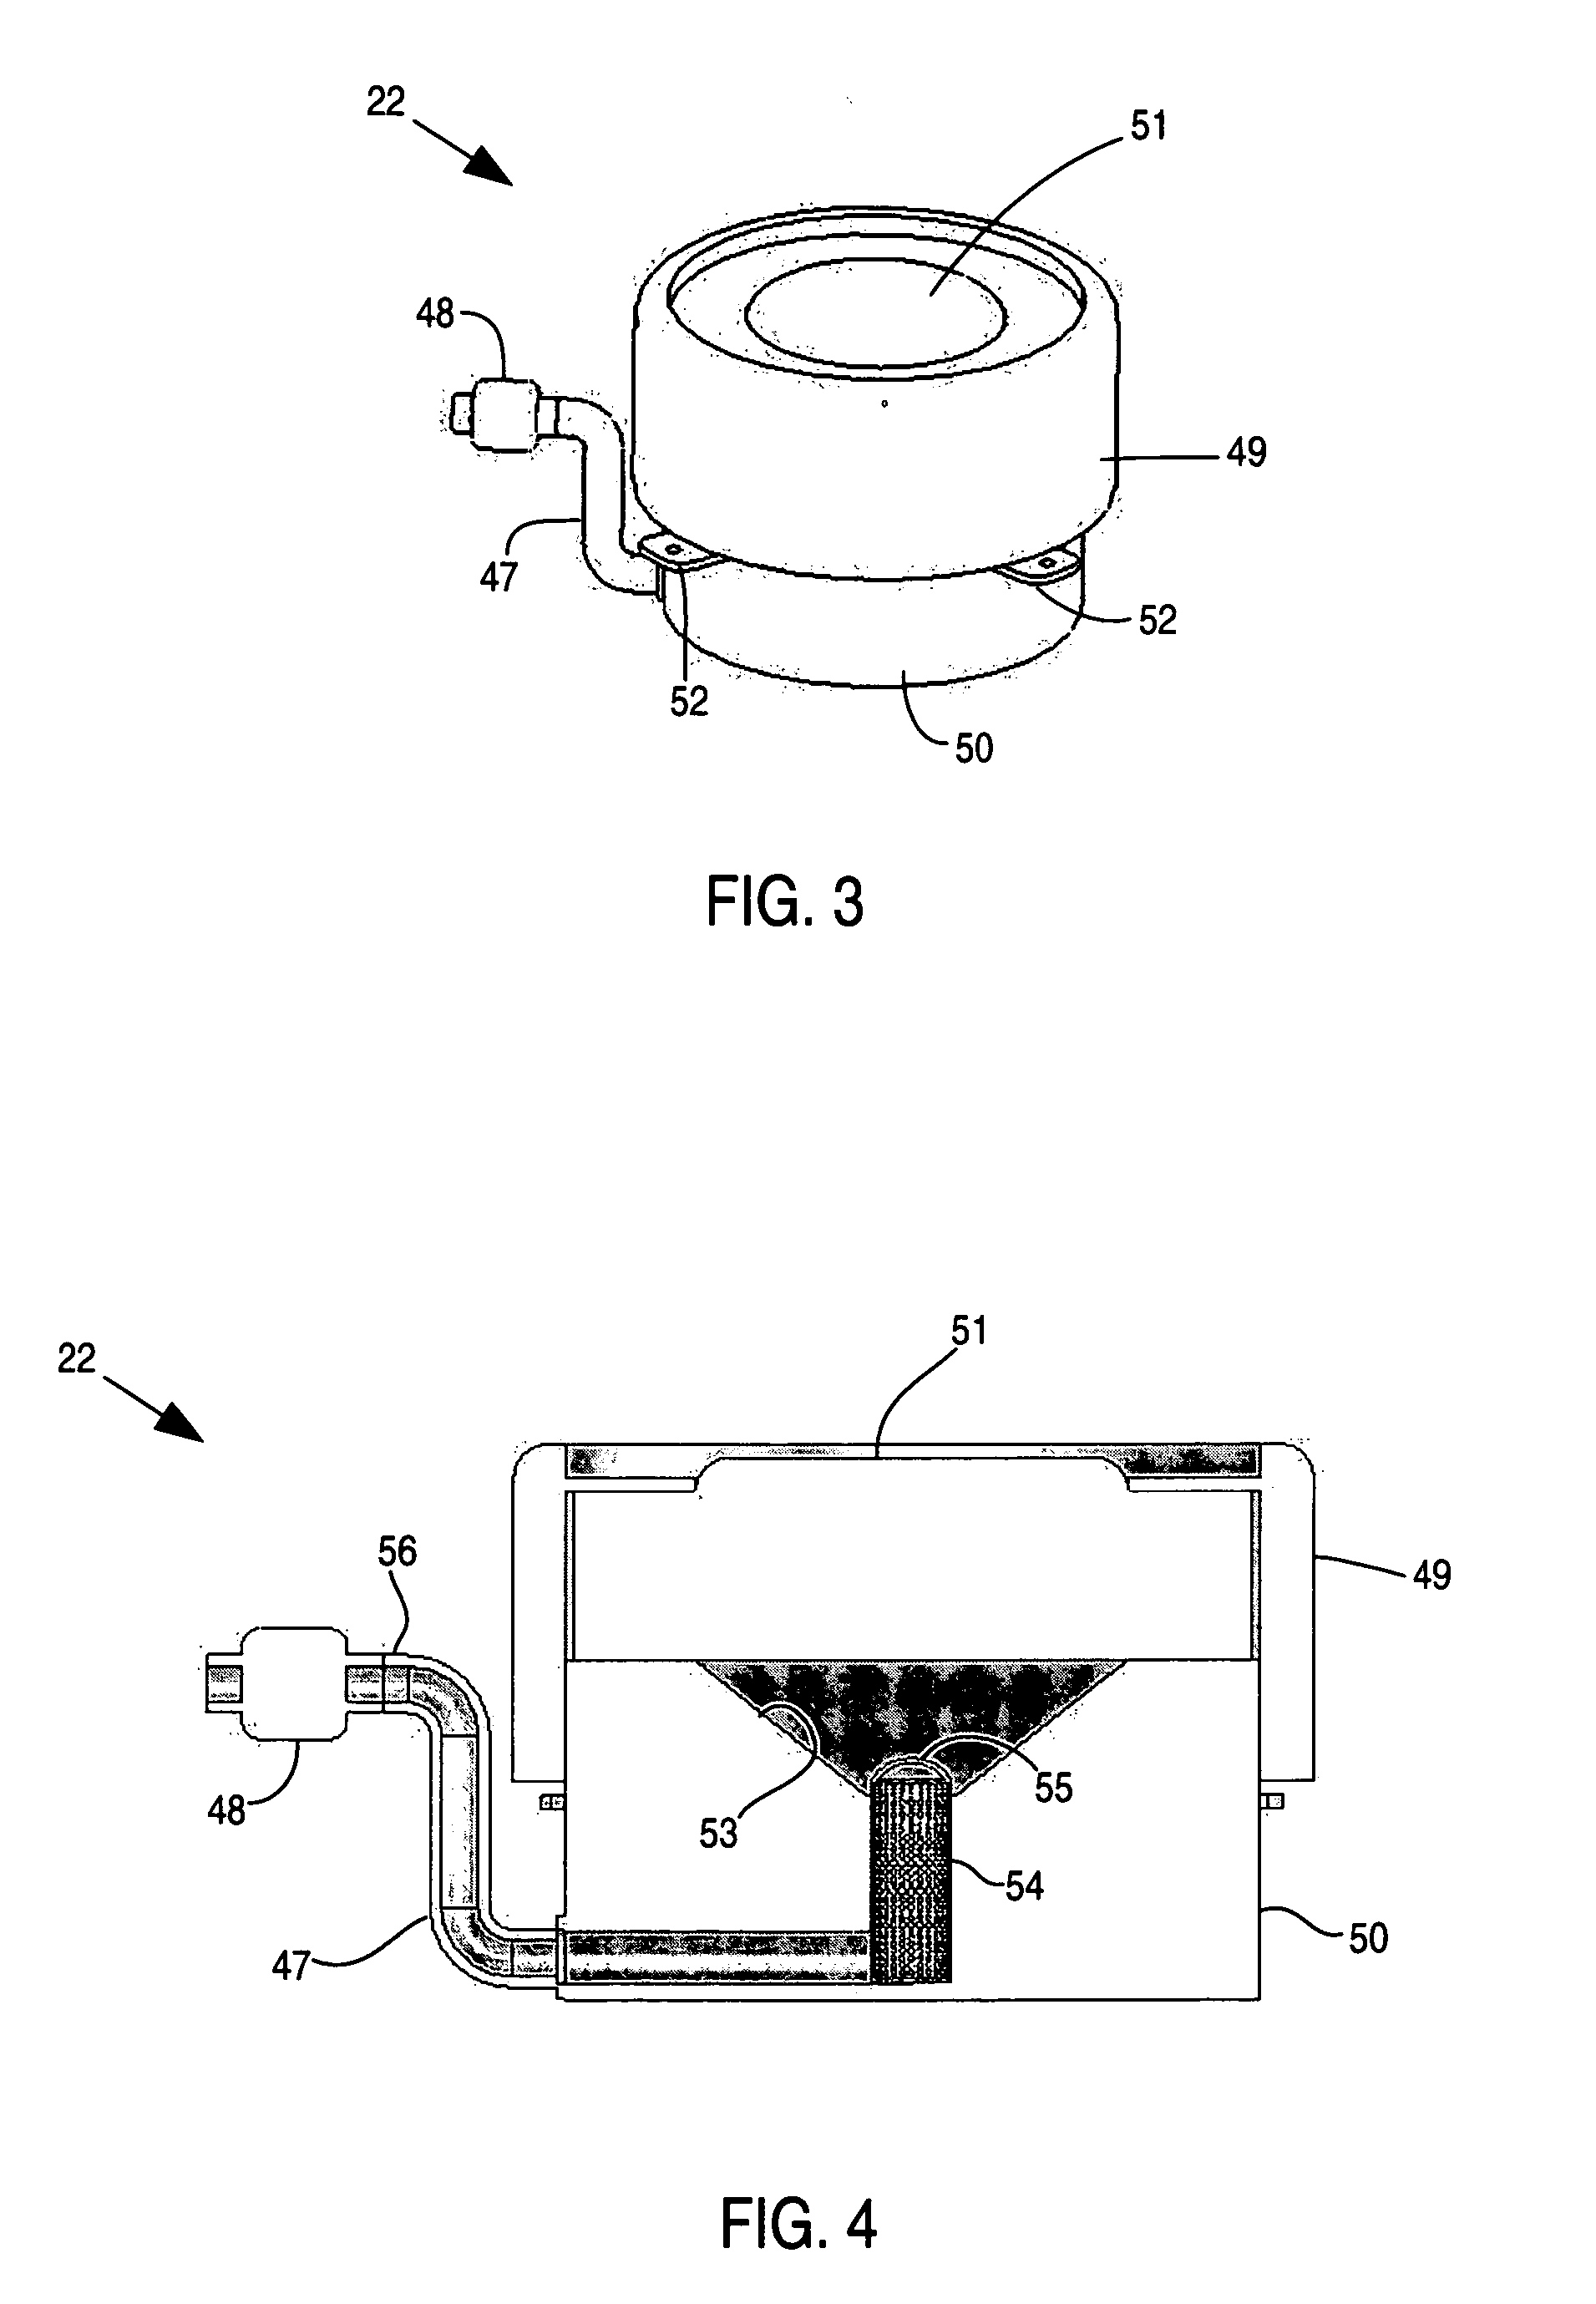 Apparatus and method for delivery of therapeutic and other types of agents